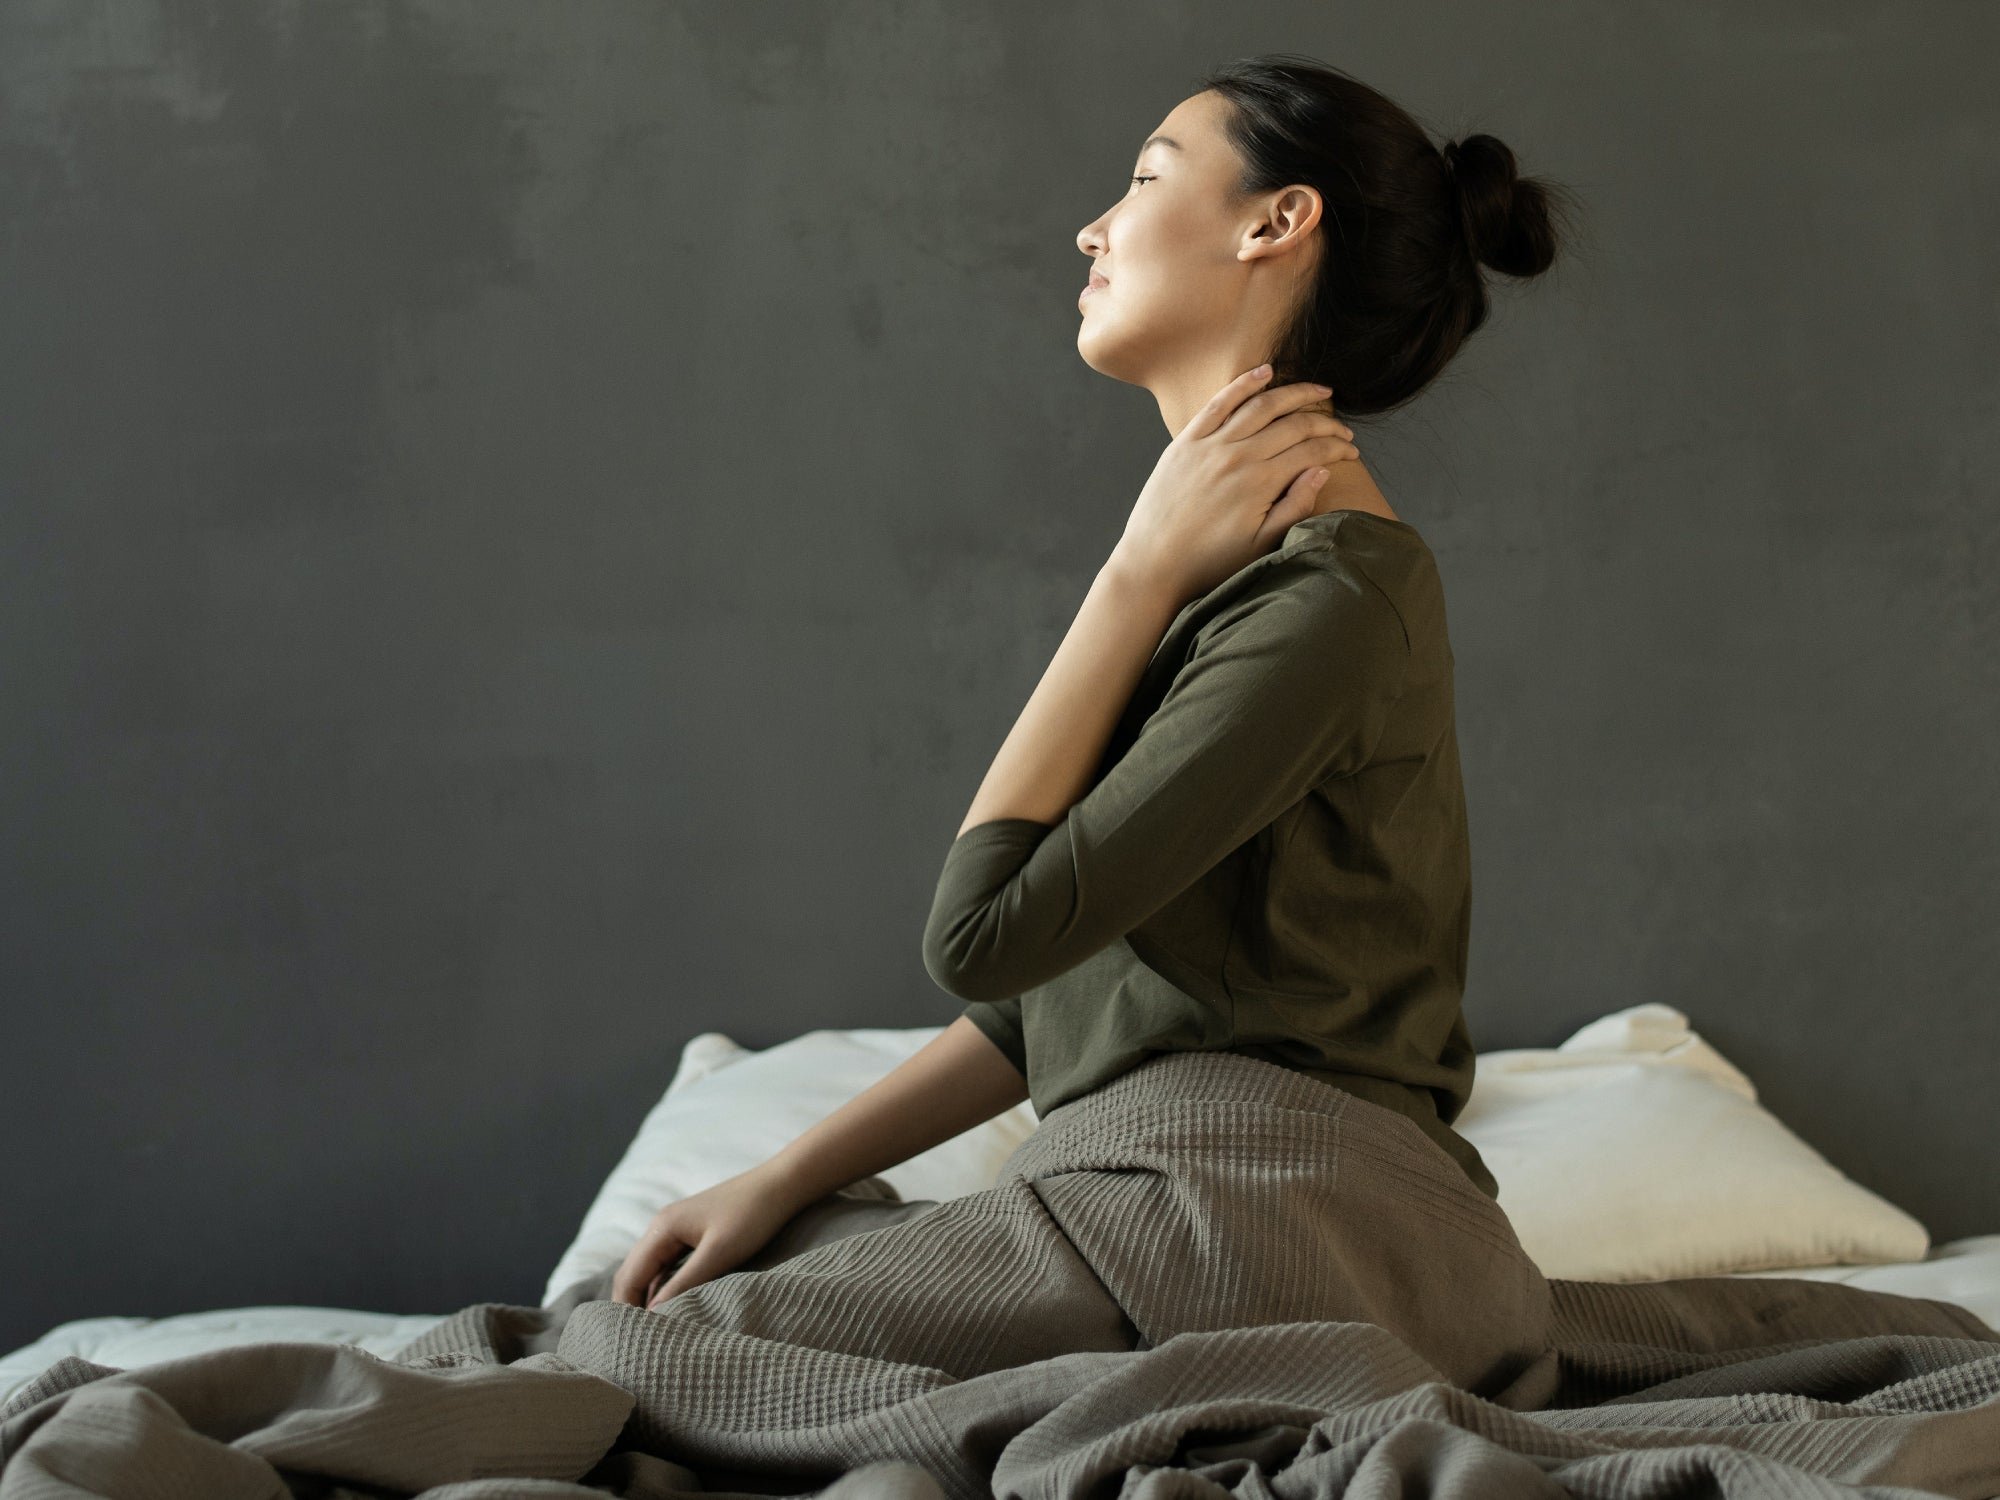 The best sleeping position for minimizing aches and pains